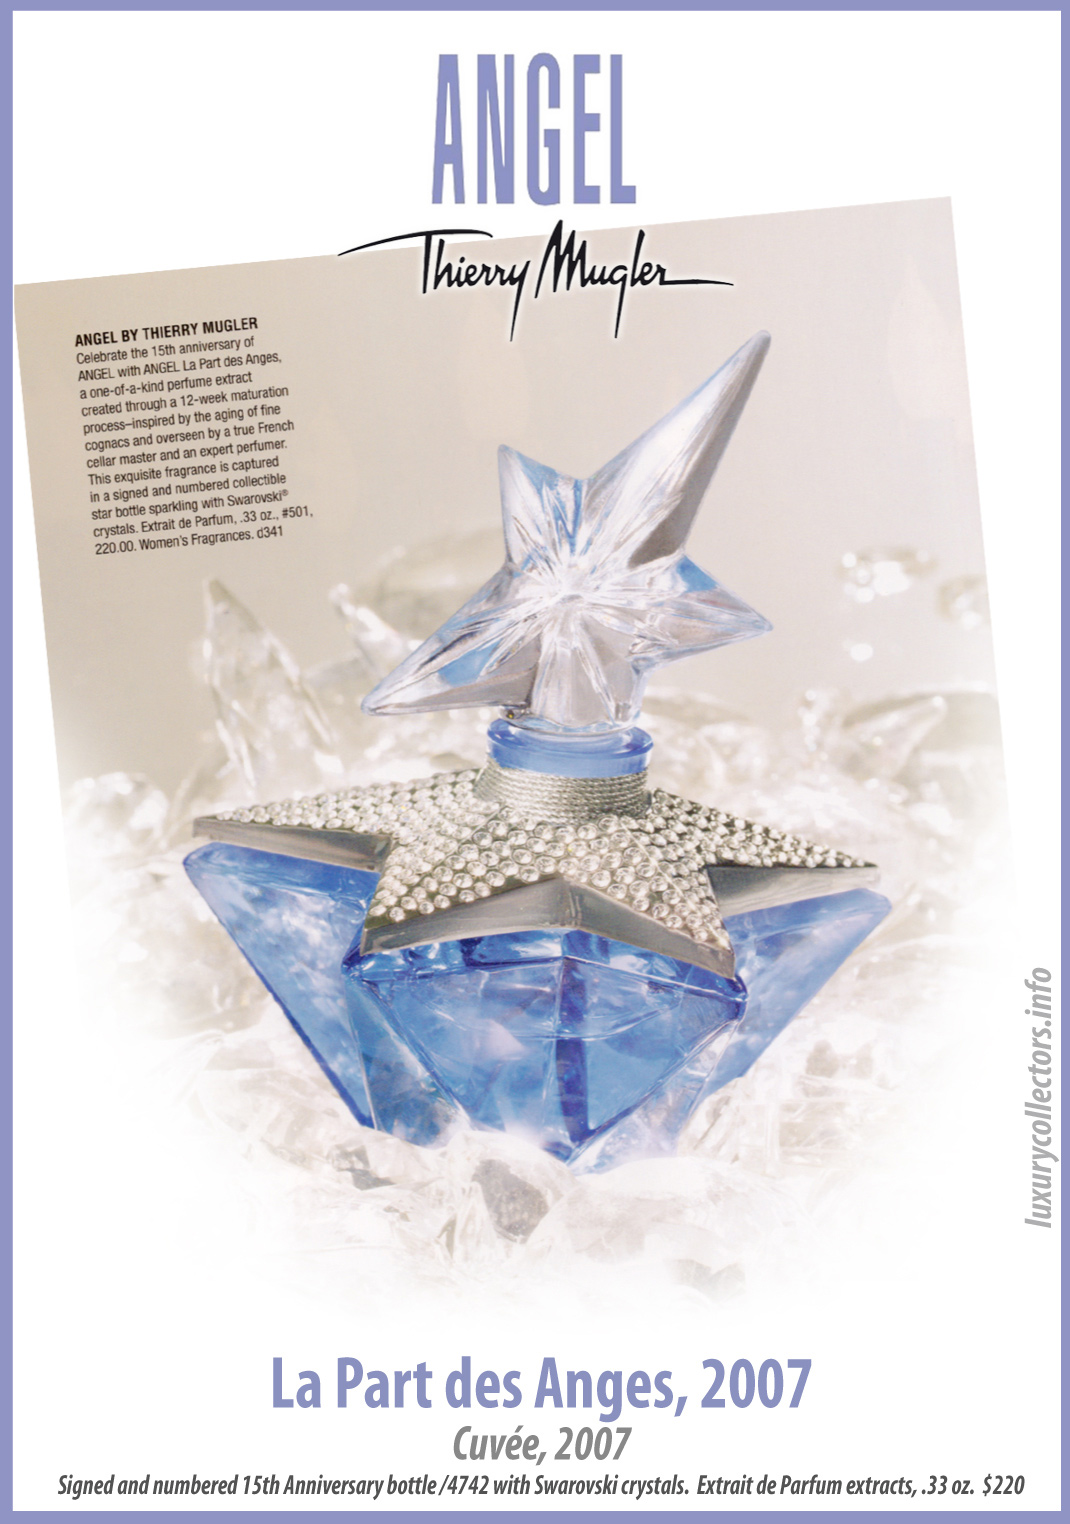 Chronological History of Thierry Mugler's Angel Luxury Perfume Bottles for Collecting